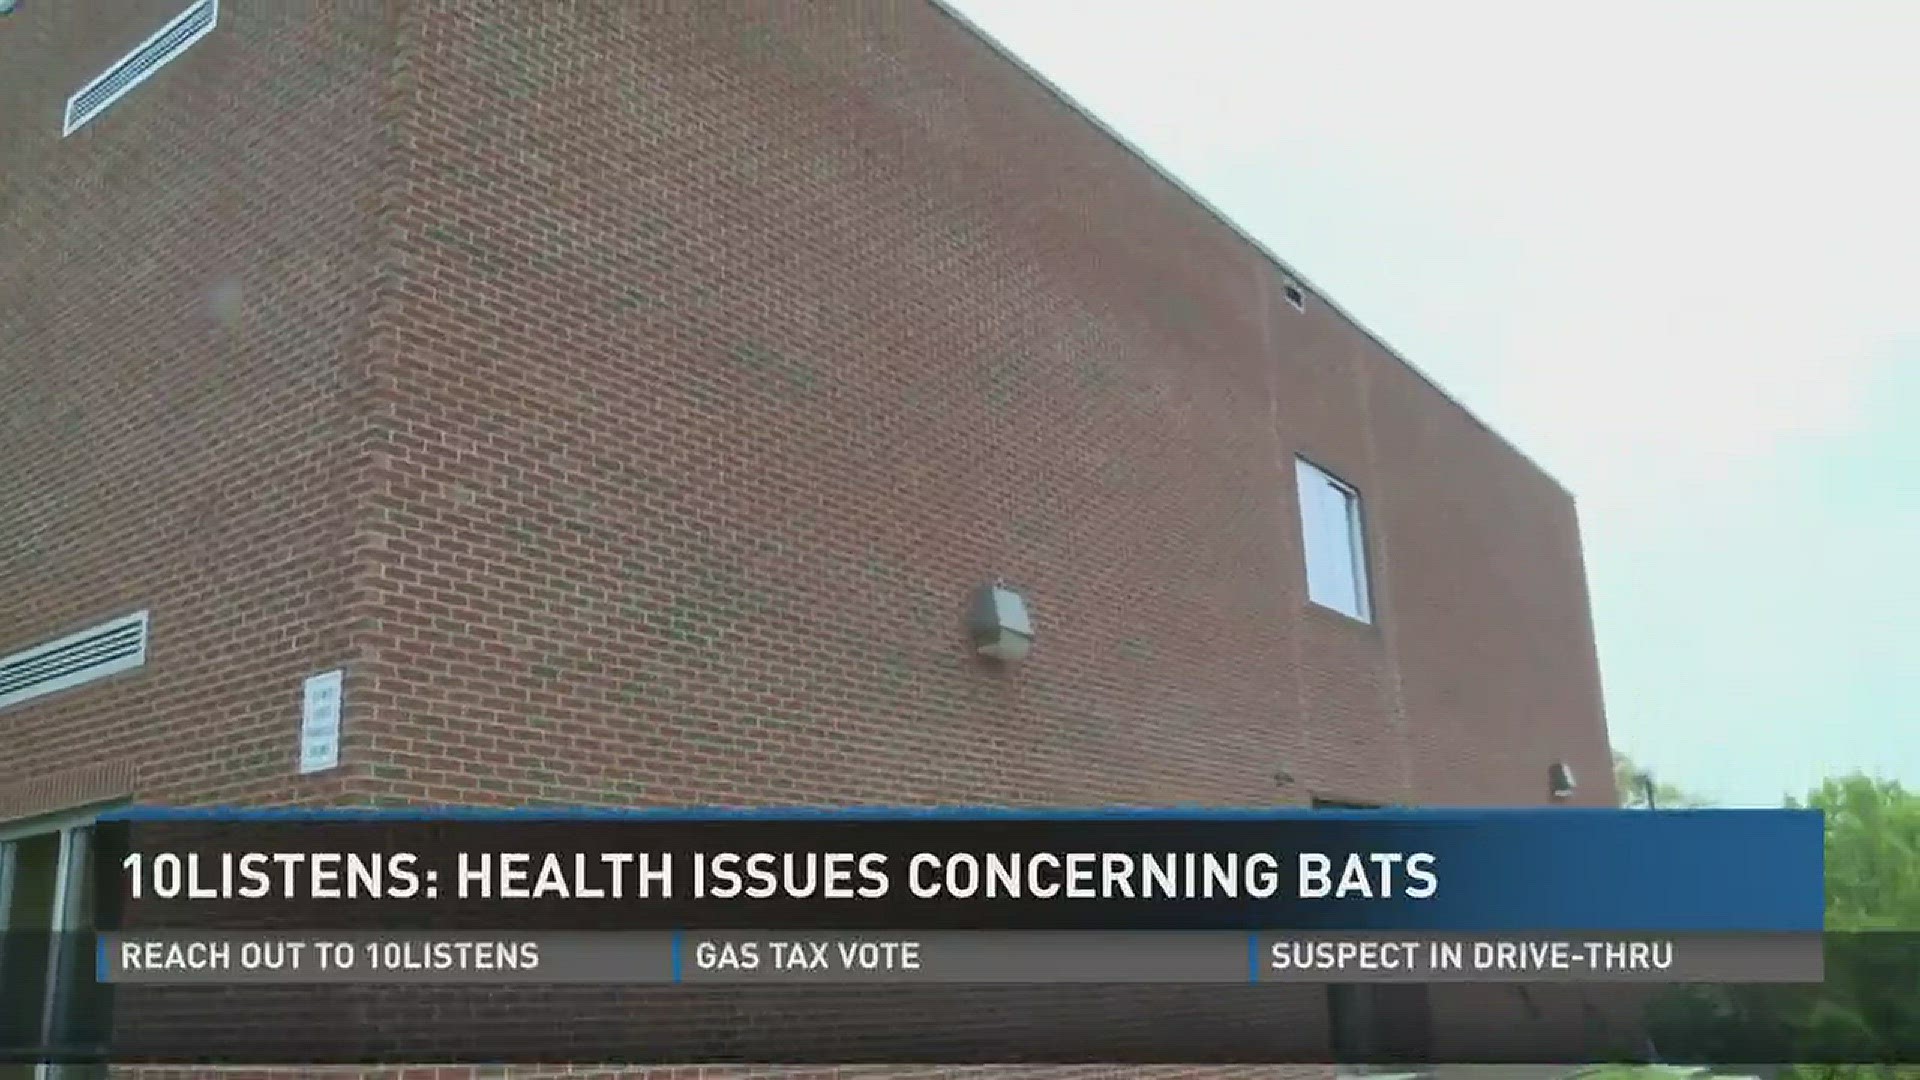 Several people reached out about the health concerns involving bats found inside an East Tennessee Middle School. (4/19/17 5 p.m.)